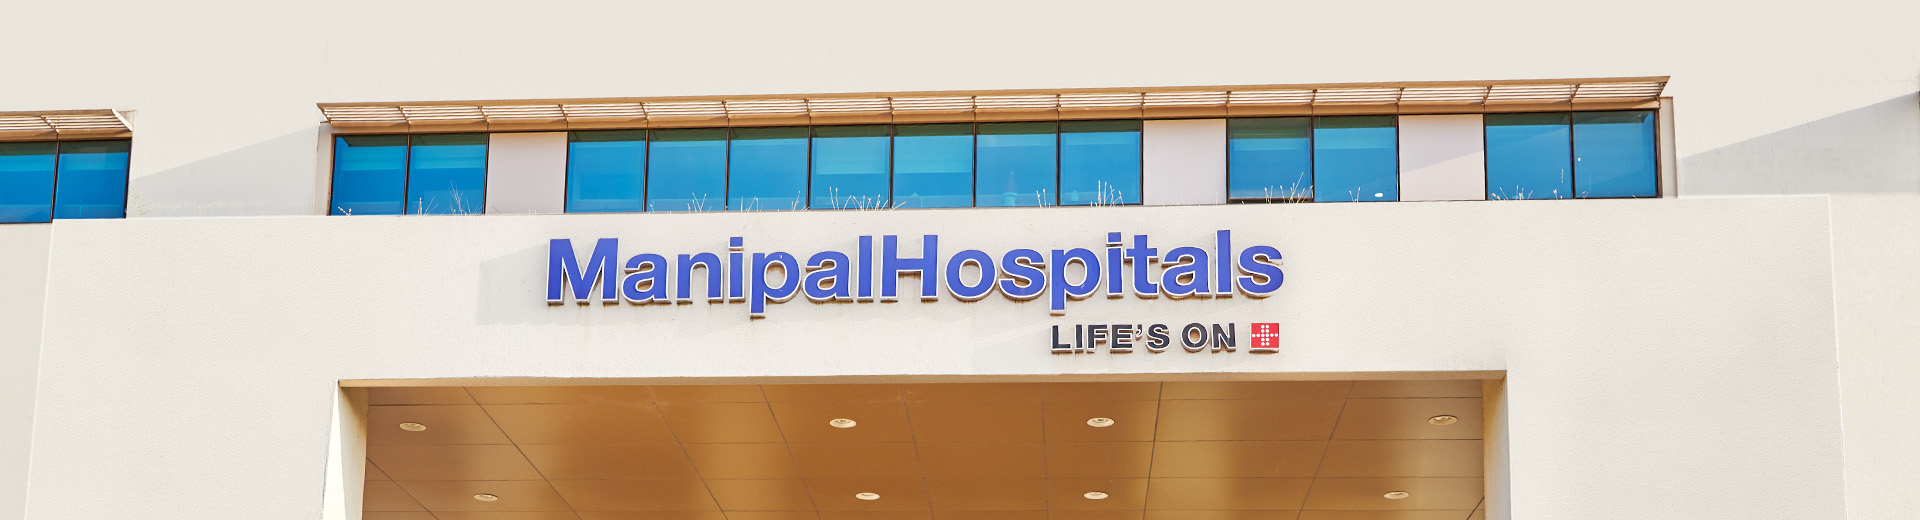 Terms and Conditions - Manipal Hospitals Brookfield Clinic